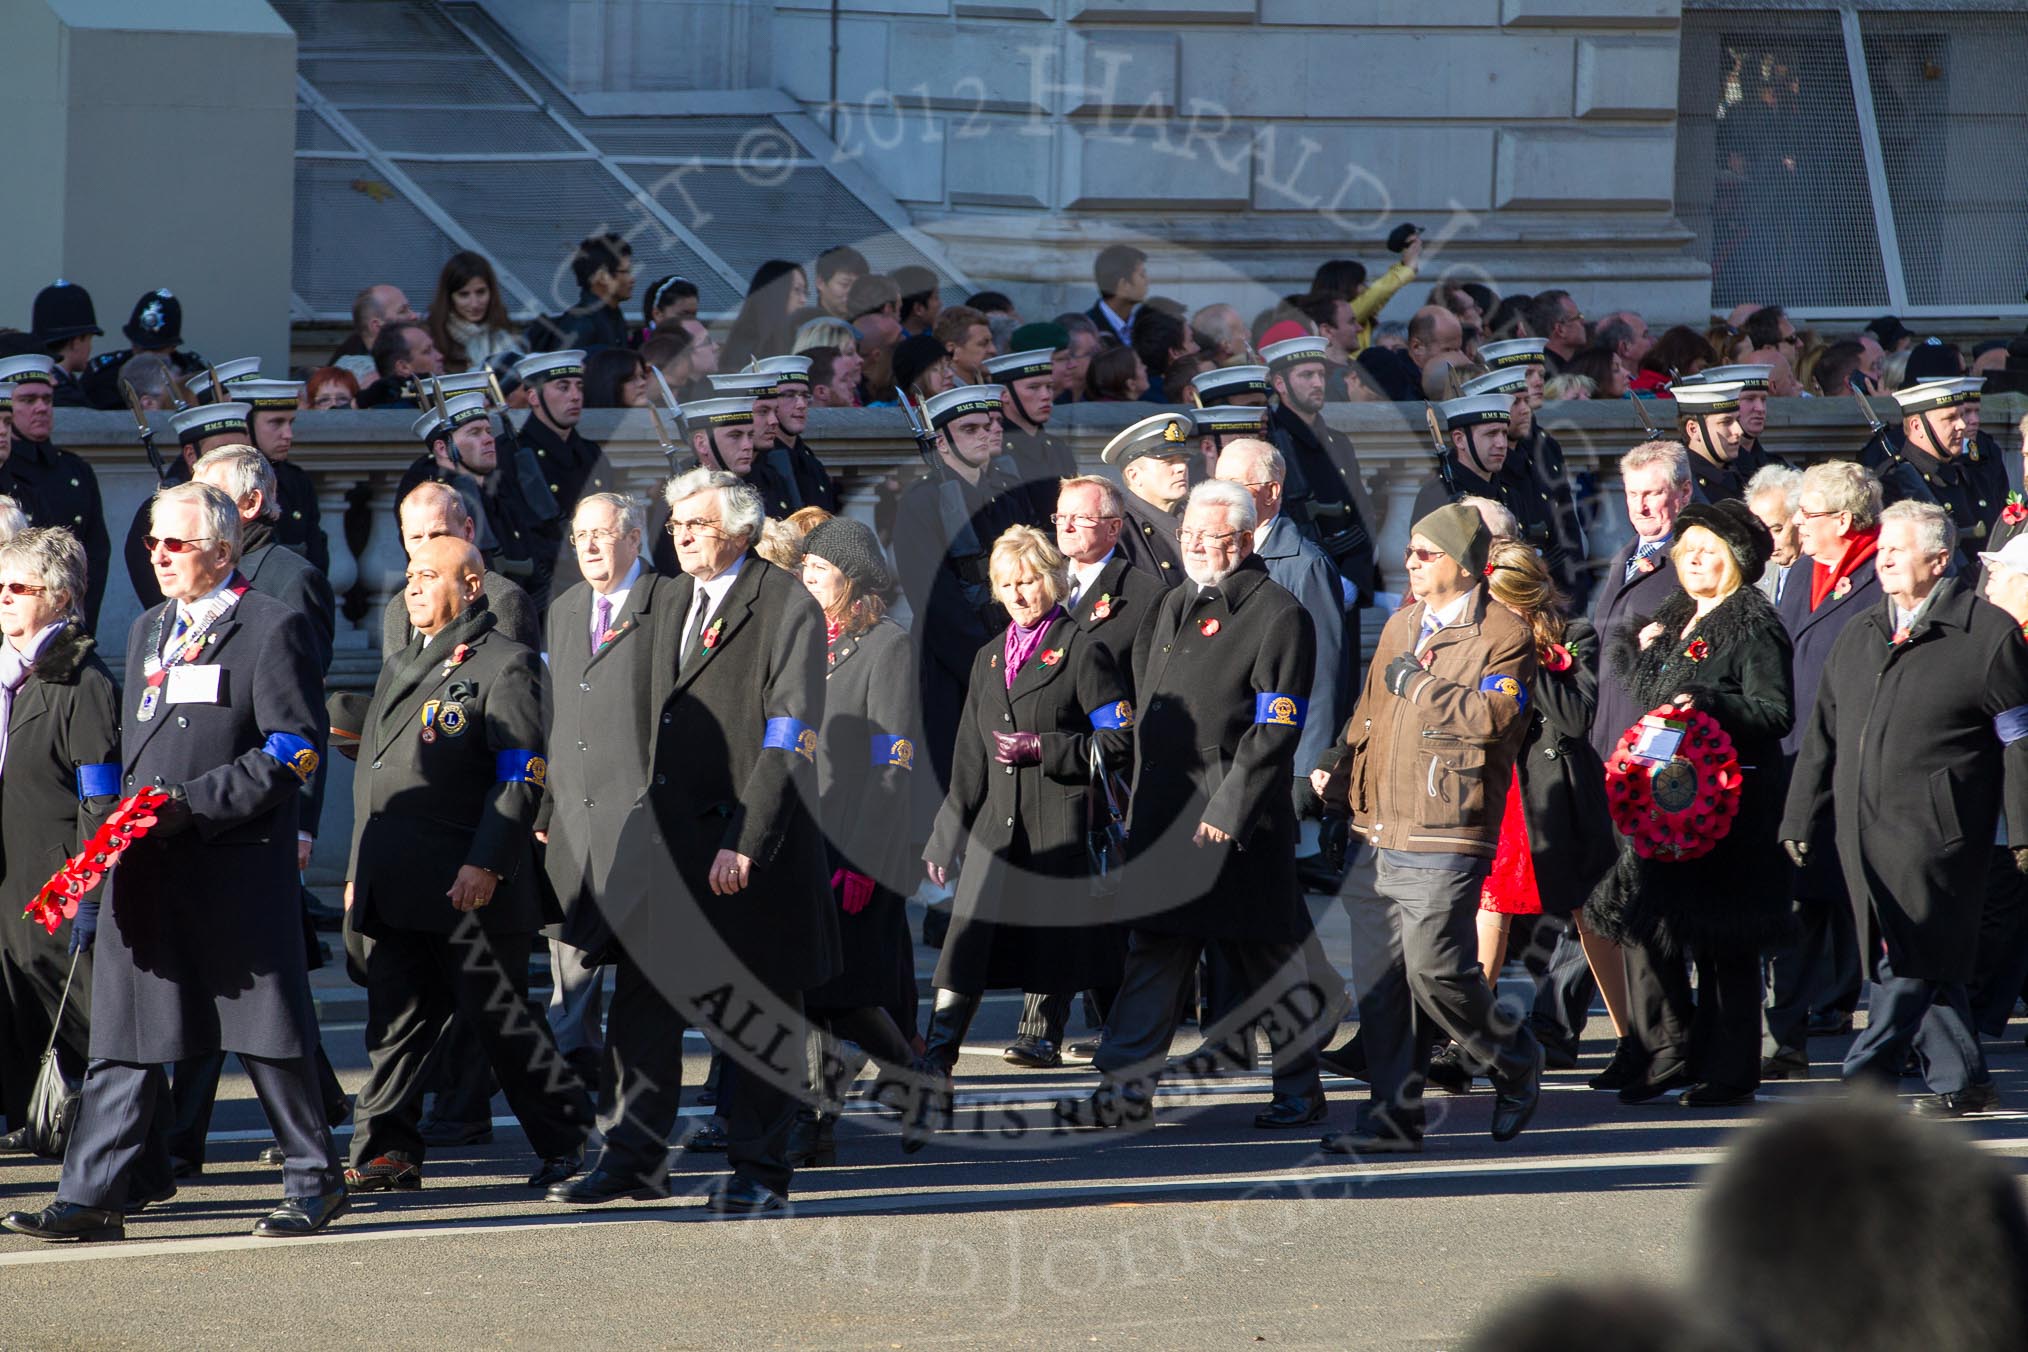 Remembrance Sunday 2012 Cenotaph March Past: Group M39 - Lions Club International and M40 - Rotary International..
Whitehall, Cenotaph,
London SW1,

United Kingdom,
on 11 November 2012 at 12:14, image #1656